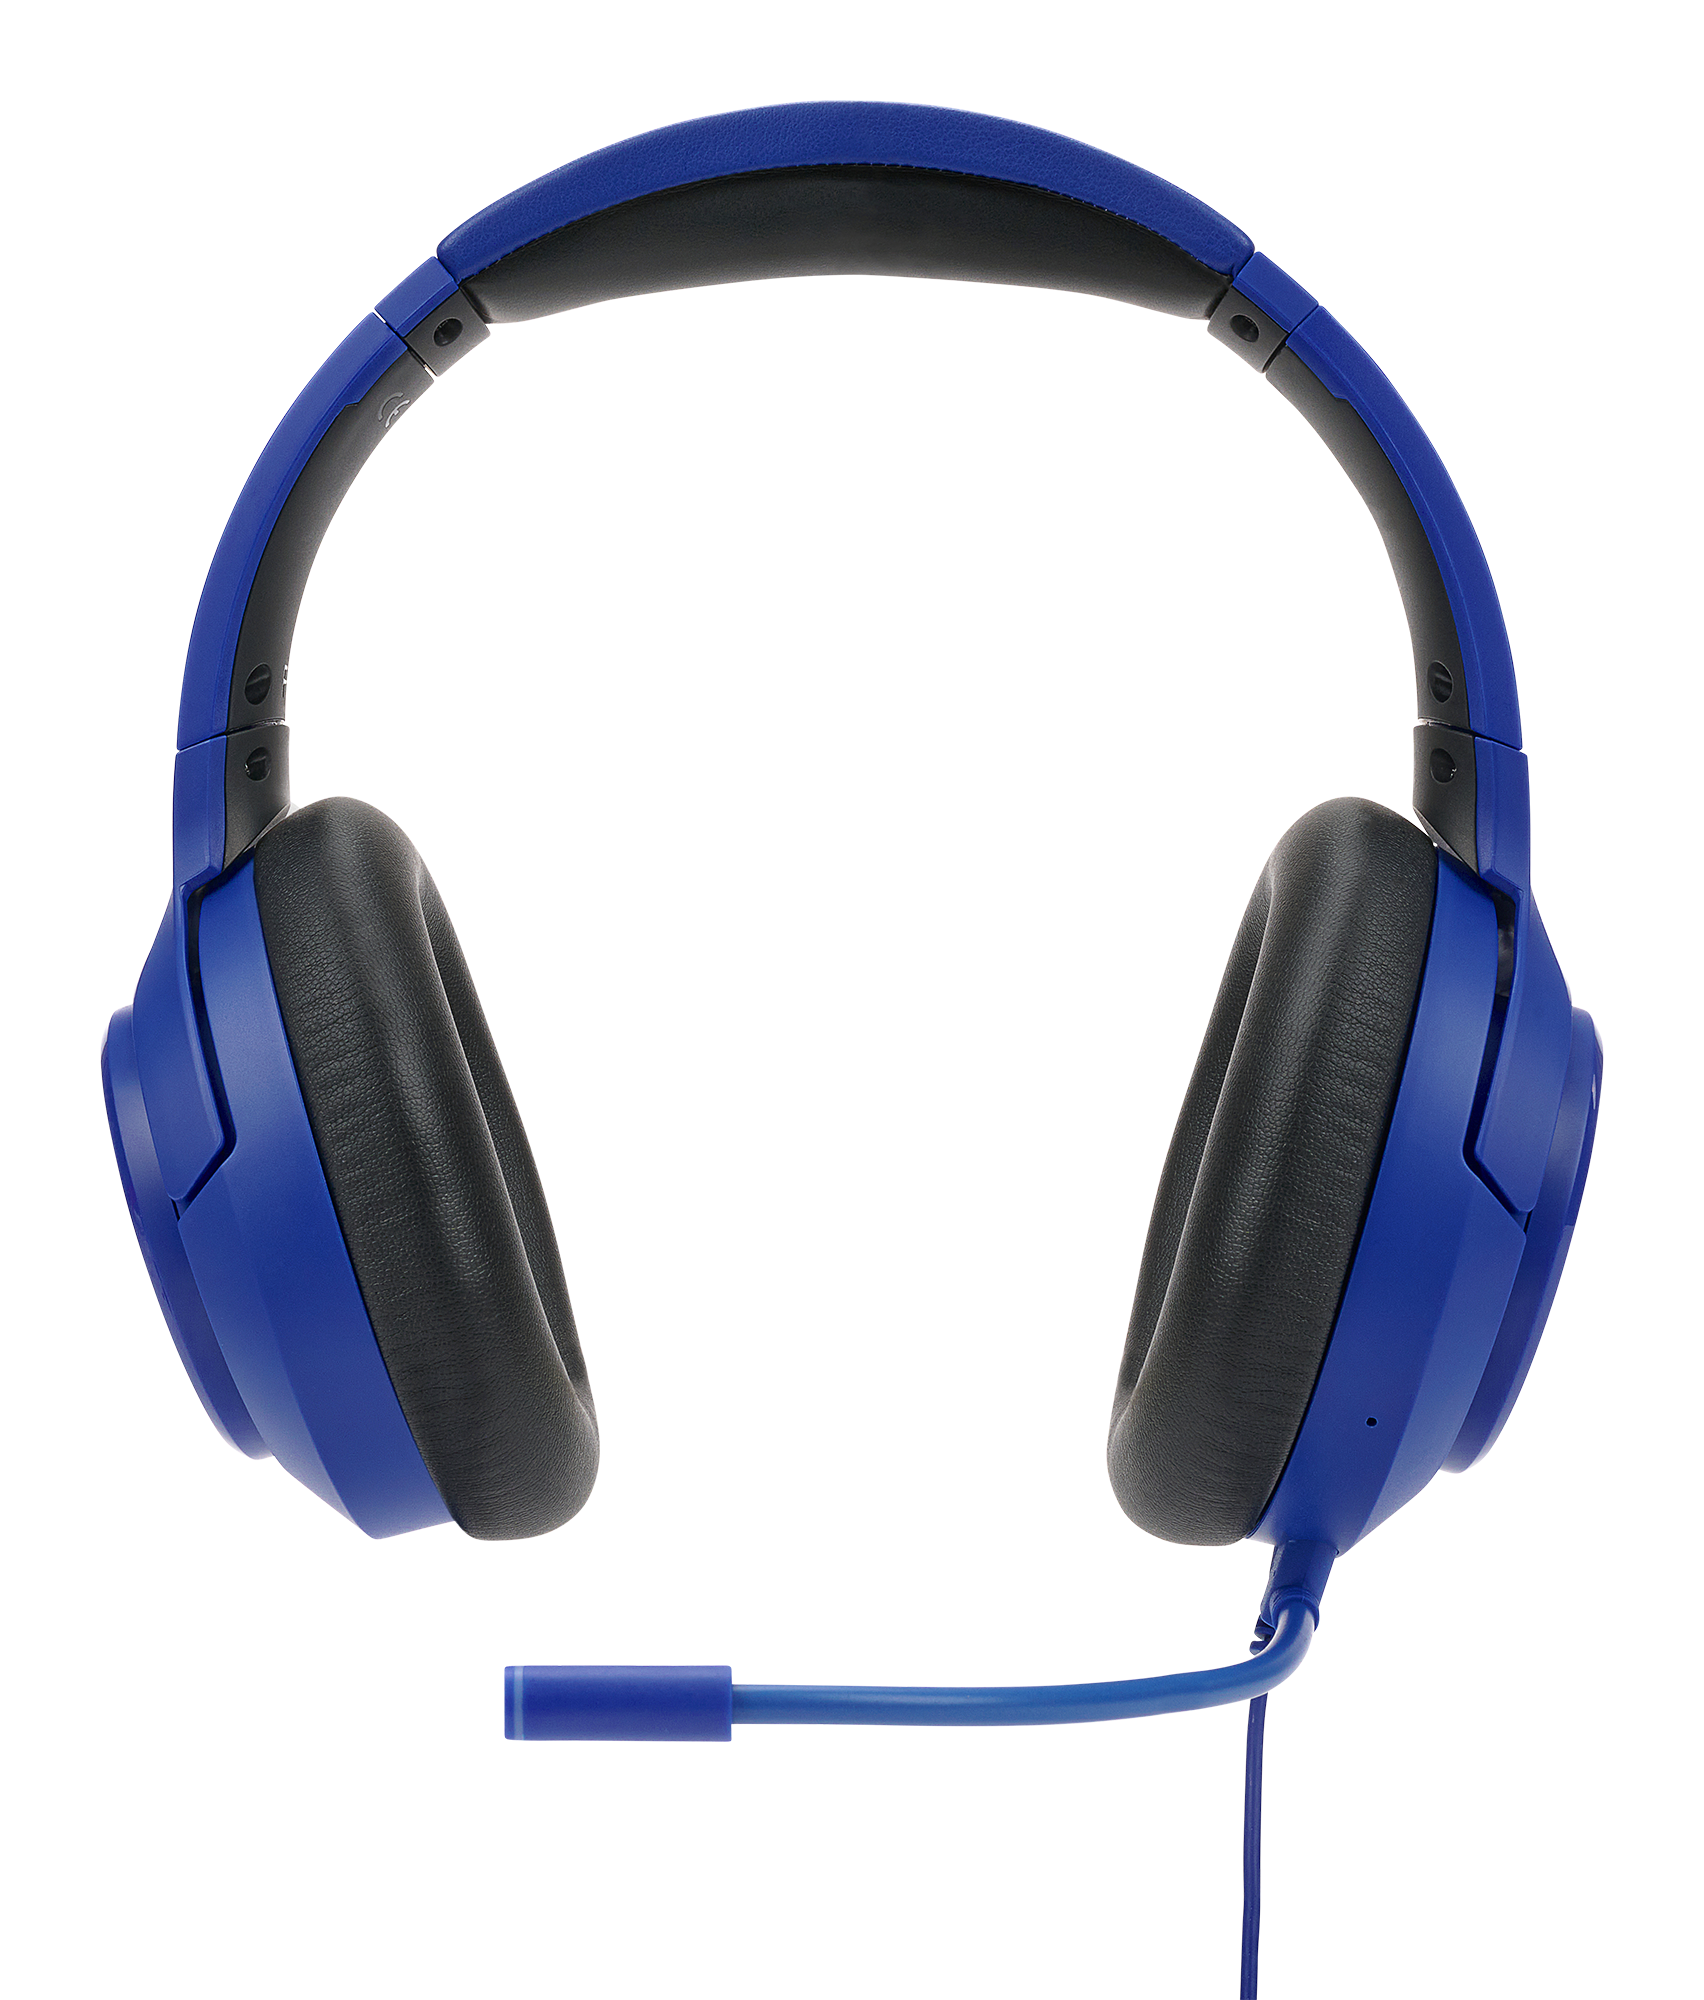 RPM Euro Games 3D Ultra Wired Gaming Headphones (Blue)